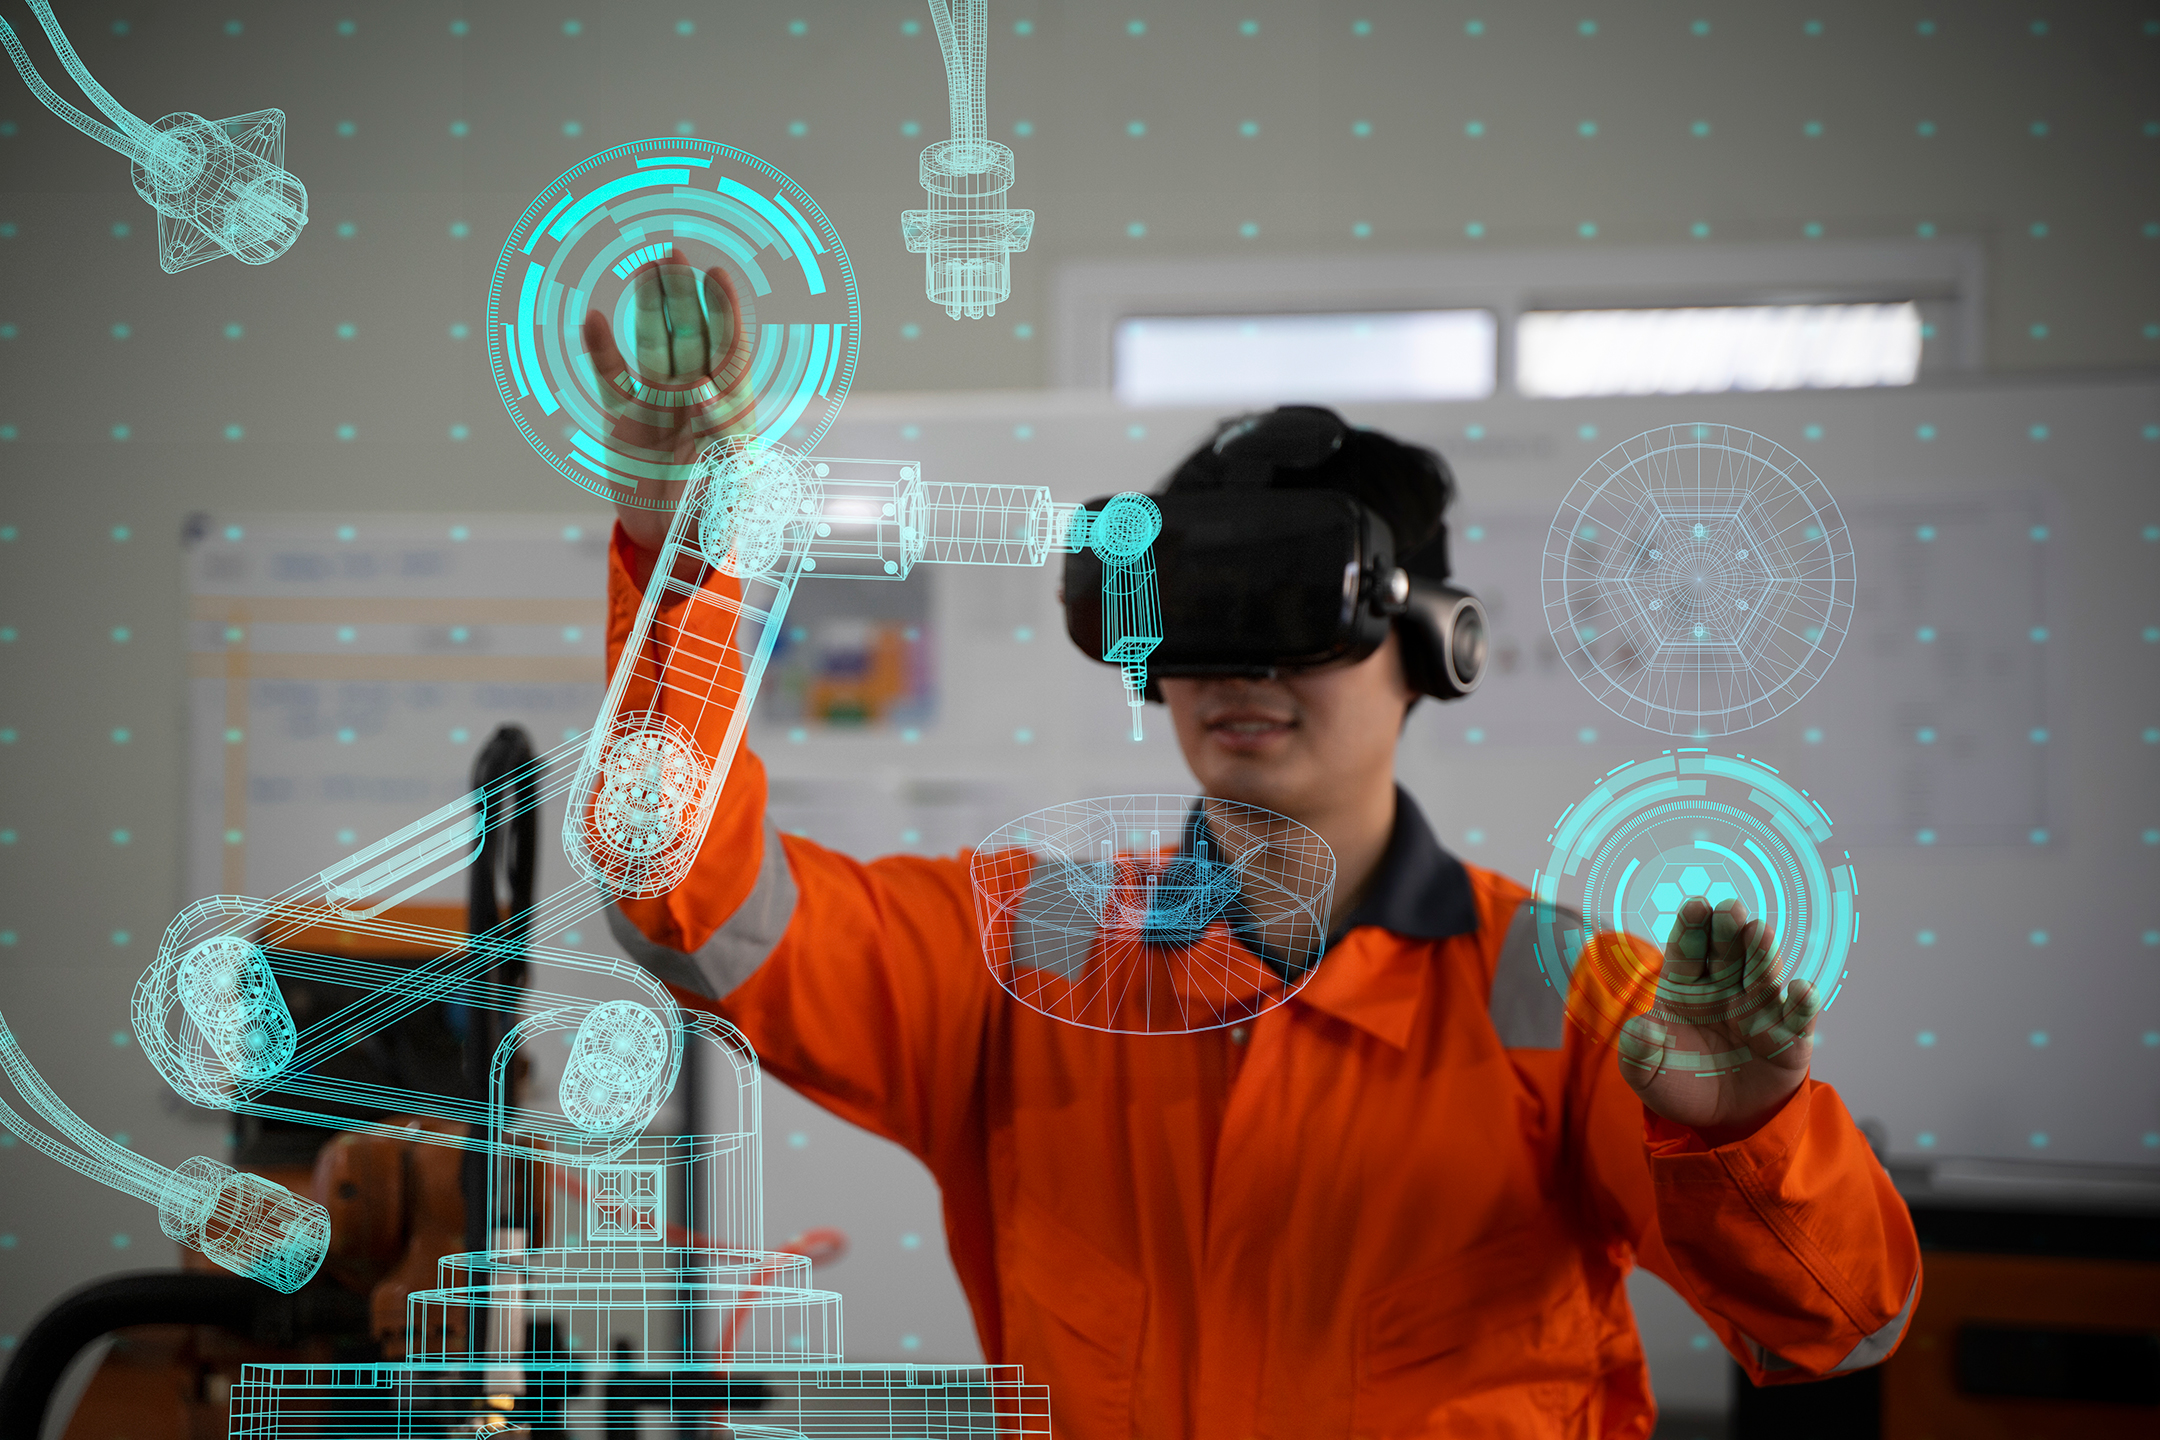 Man using a VR headset and metaverse technology in an industrial setting